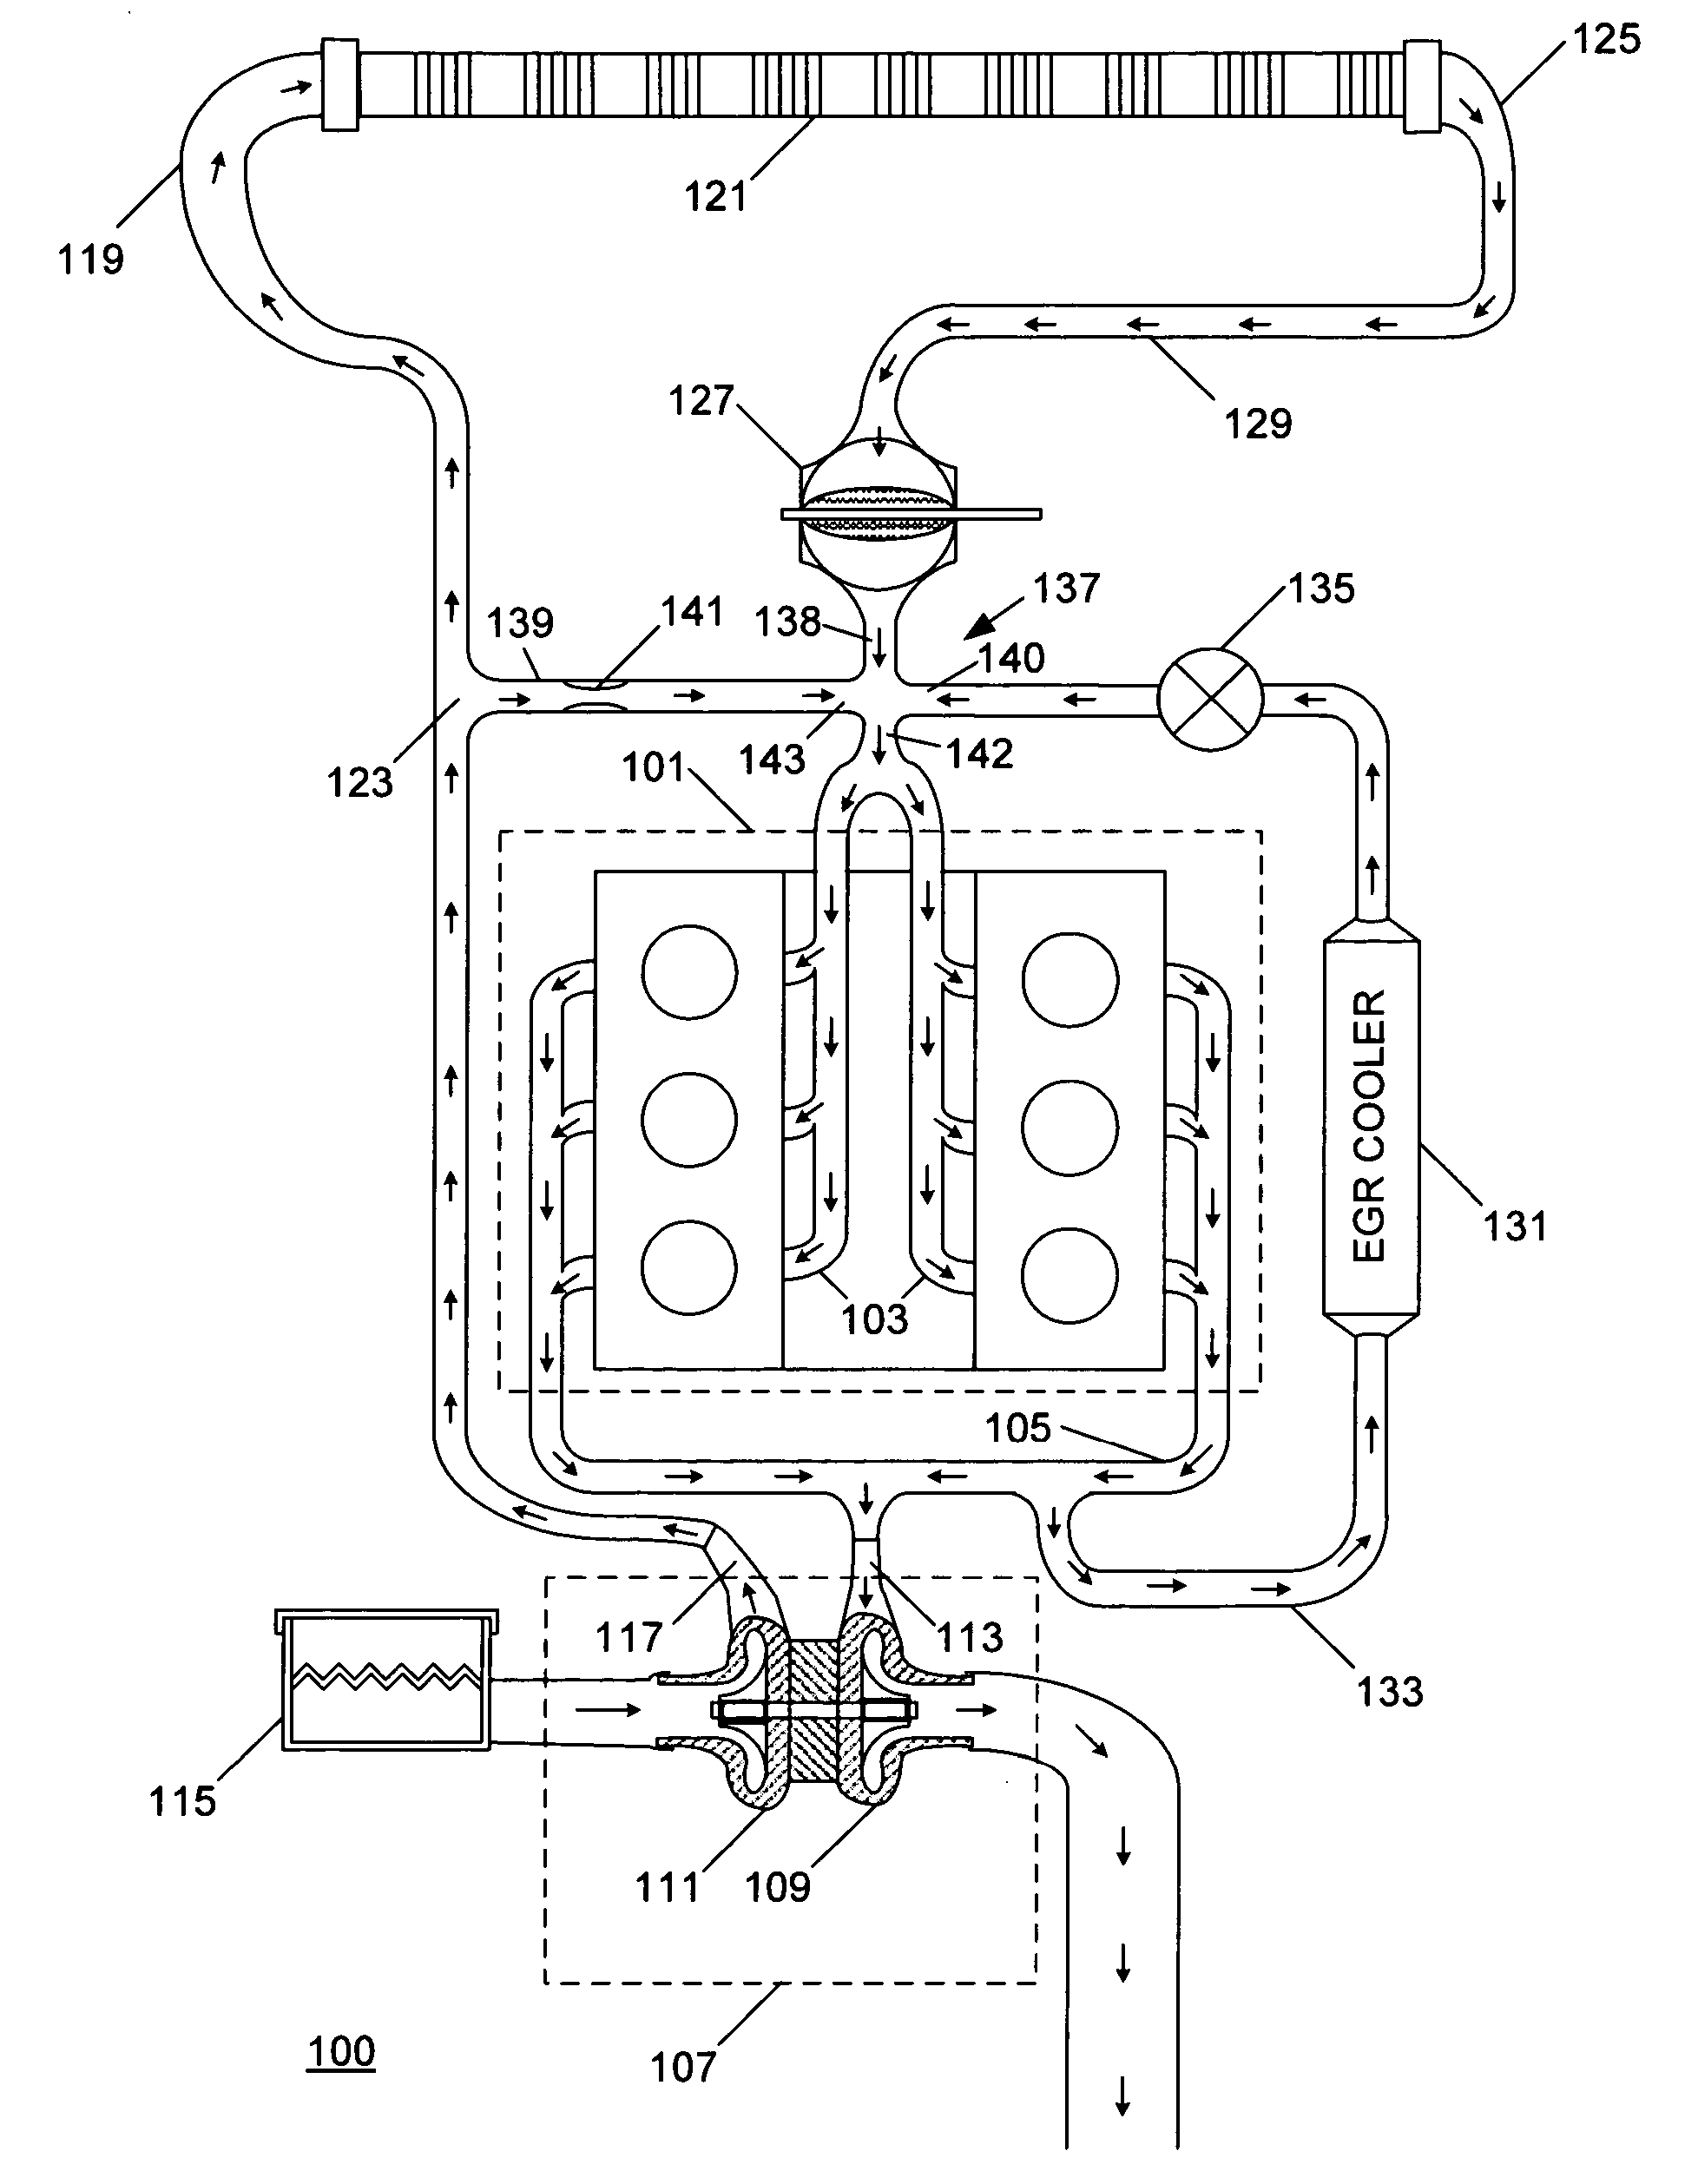 Diesel engine charge air cooler bypass passage and method